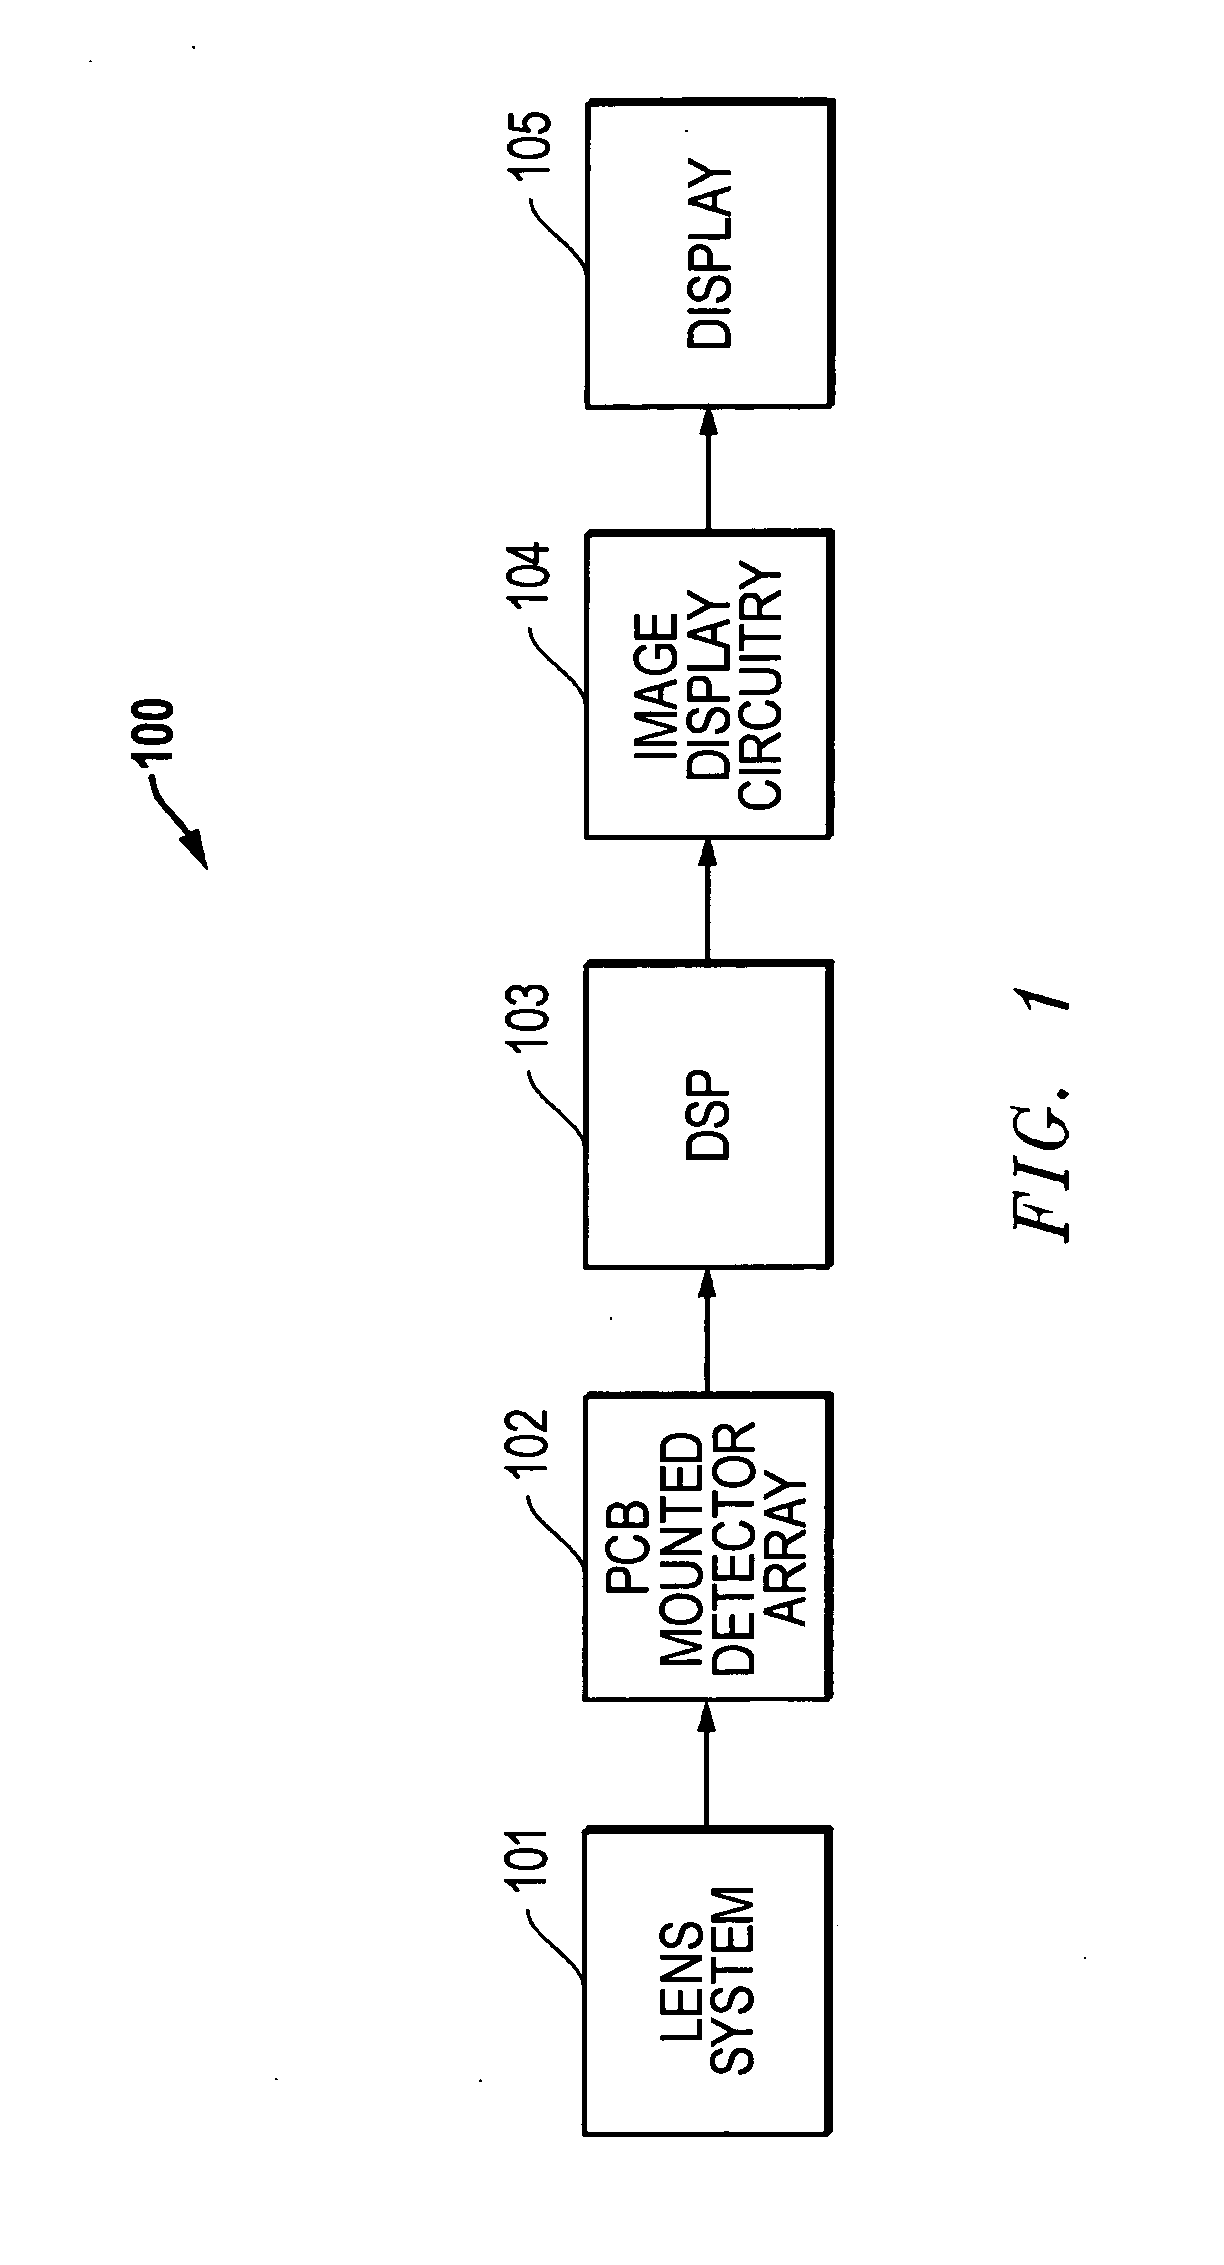 Surface mounted infrared image detector systems and associated methods